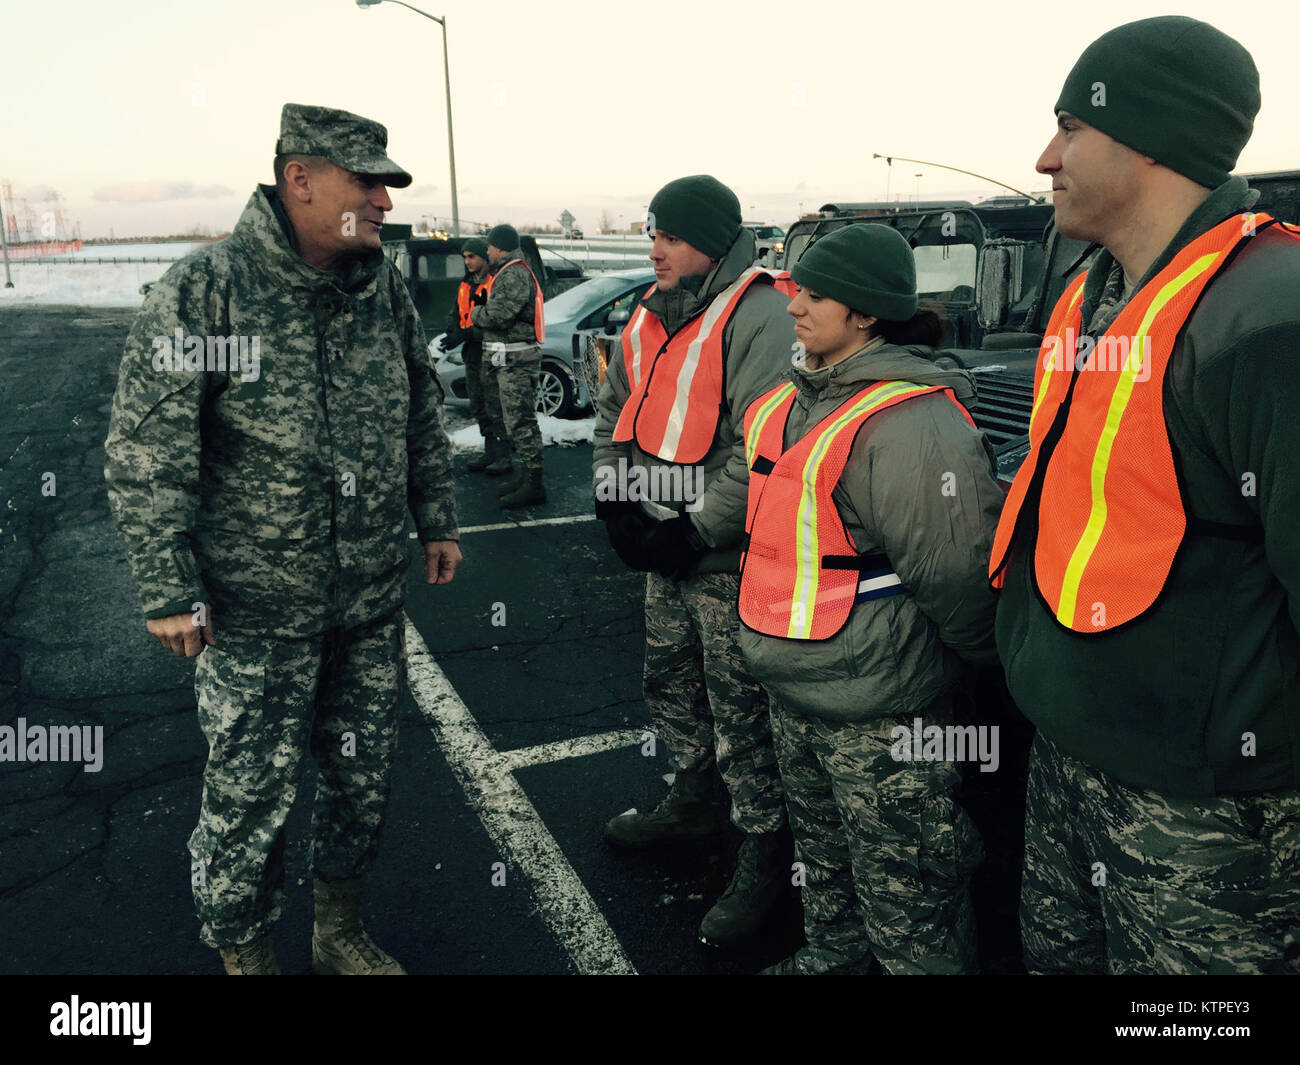 Major General Patrick Murphy, the Adjutant General of New York speaks to Army National Guard Soldiers preparing to go on a traffic control point mission on Friday, Jan. 9, 2015 as the New York National Guard assisted the New York State Thruway Authority in closing portions of the road in Buffalo due to poor weather conditions. (U.S. Army National Guard photo by Major Mark Frank/Released) Stock Photo